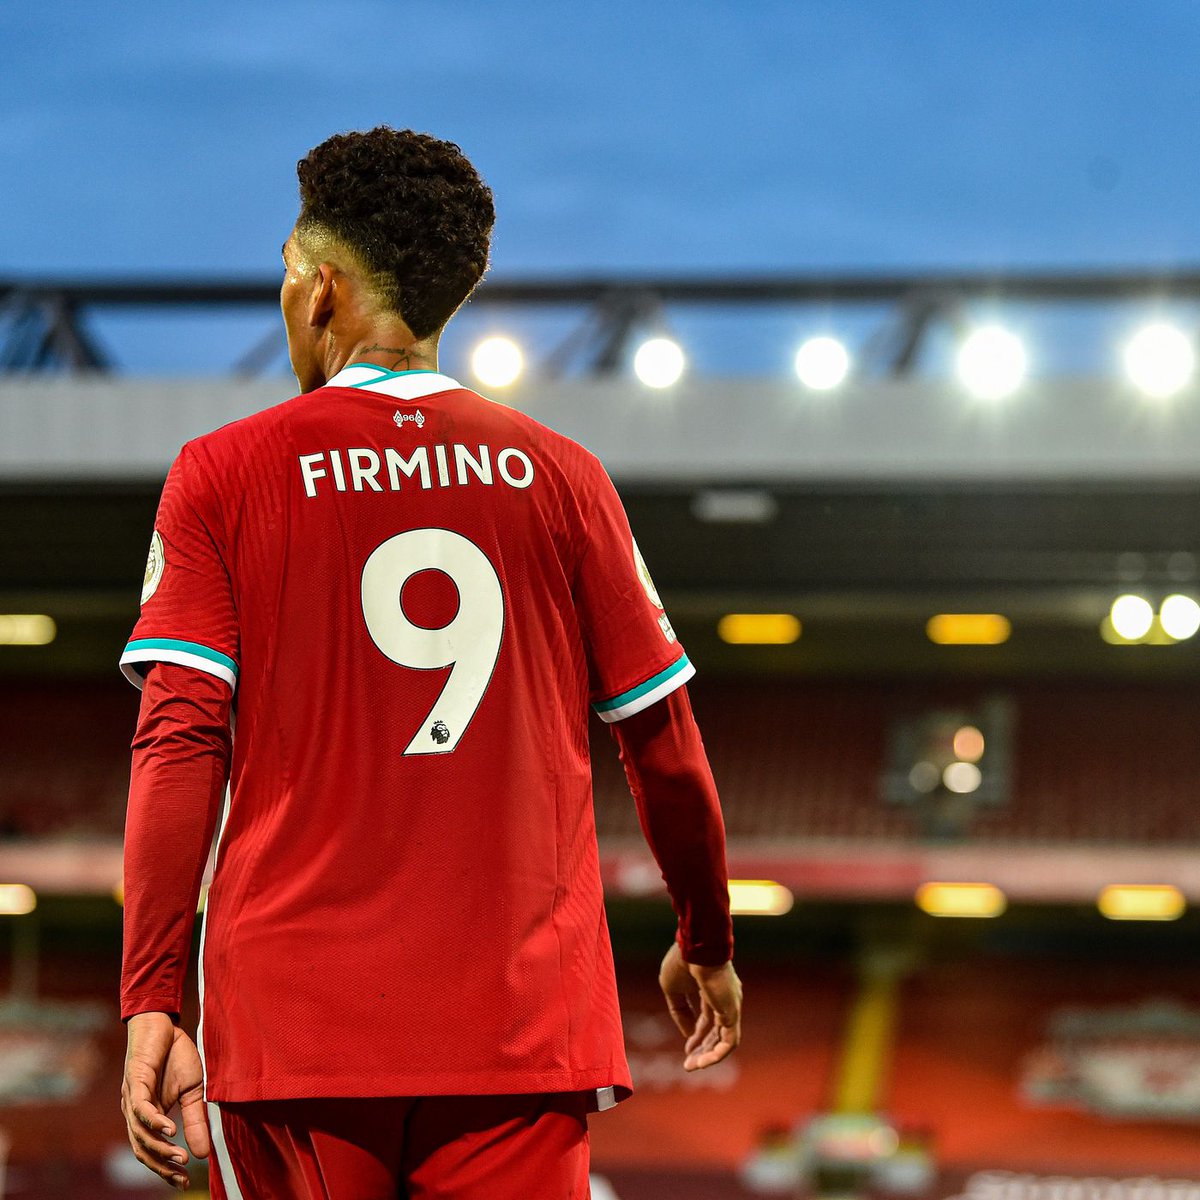 A thread revealing how and why Roberto Firmino is slightly overrated...Made by an honest fan.